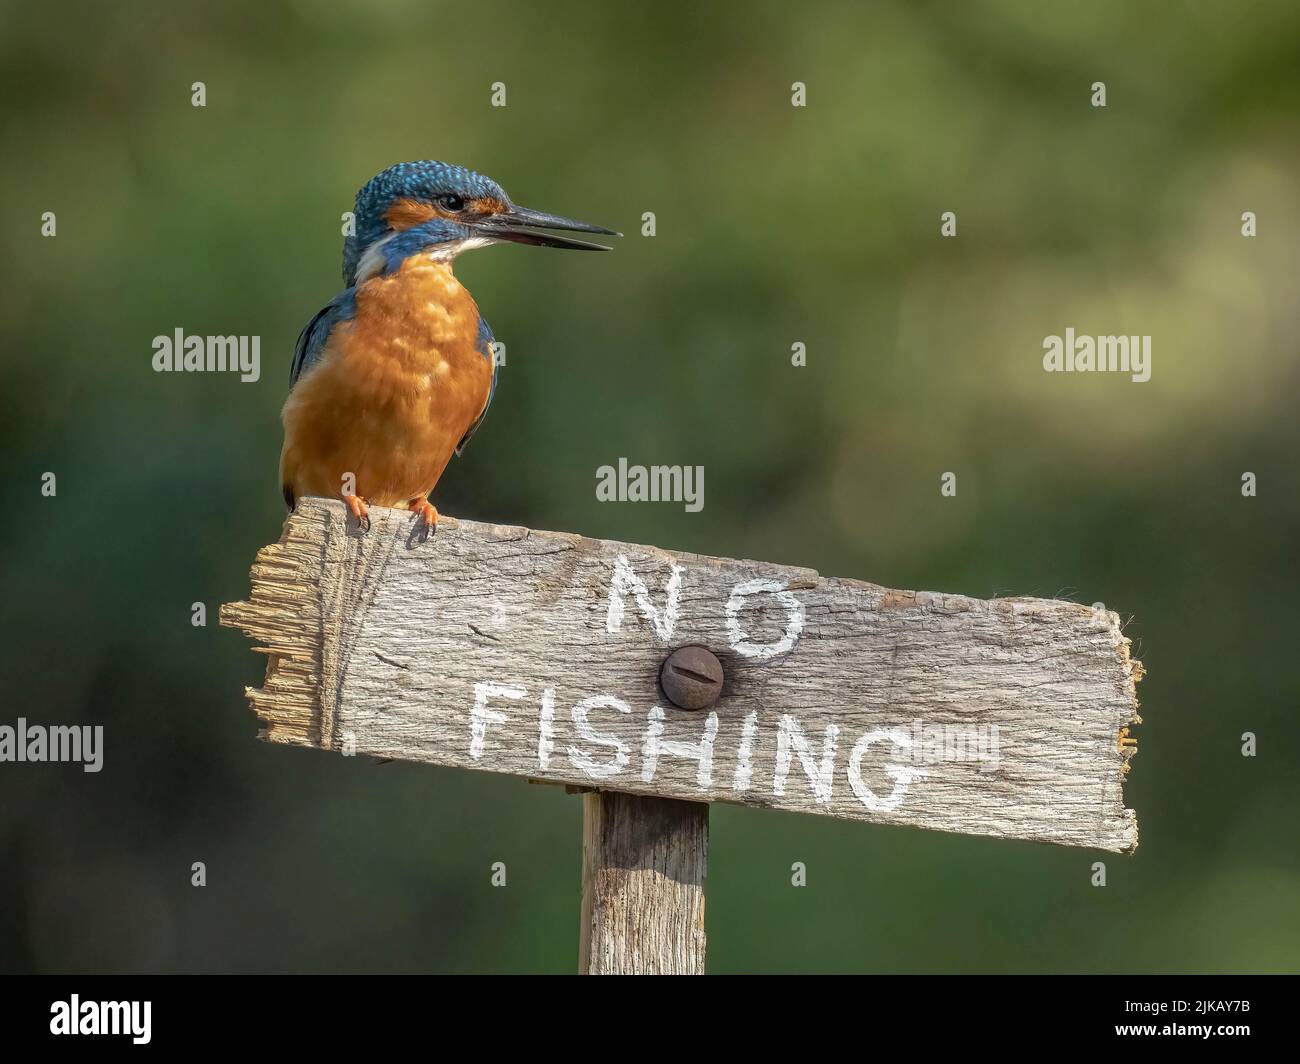 The kingfisher perched on a 